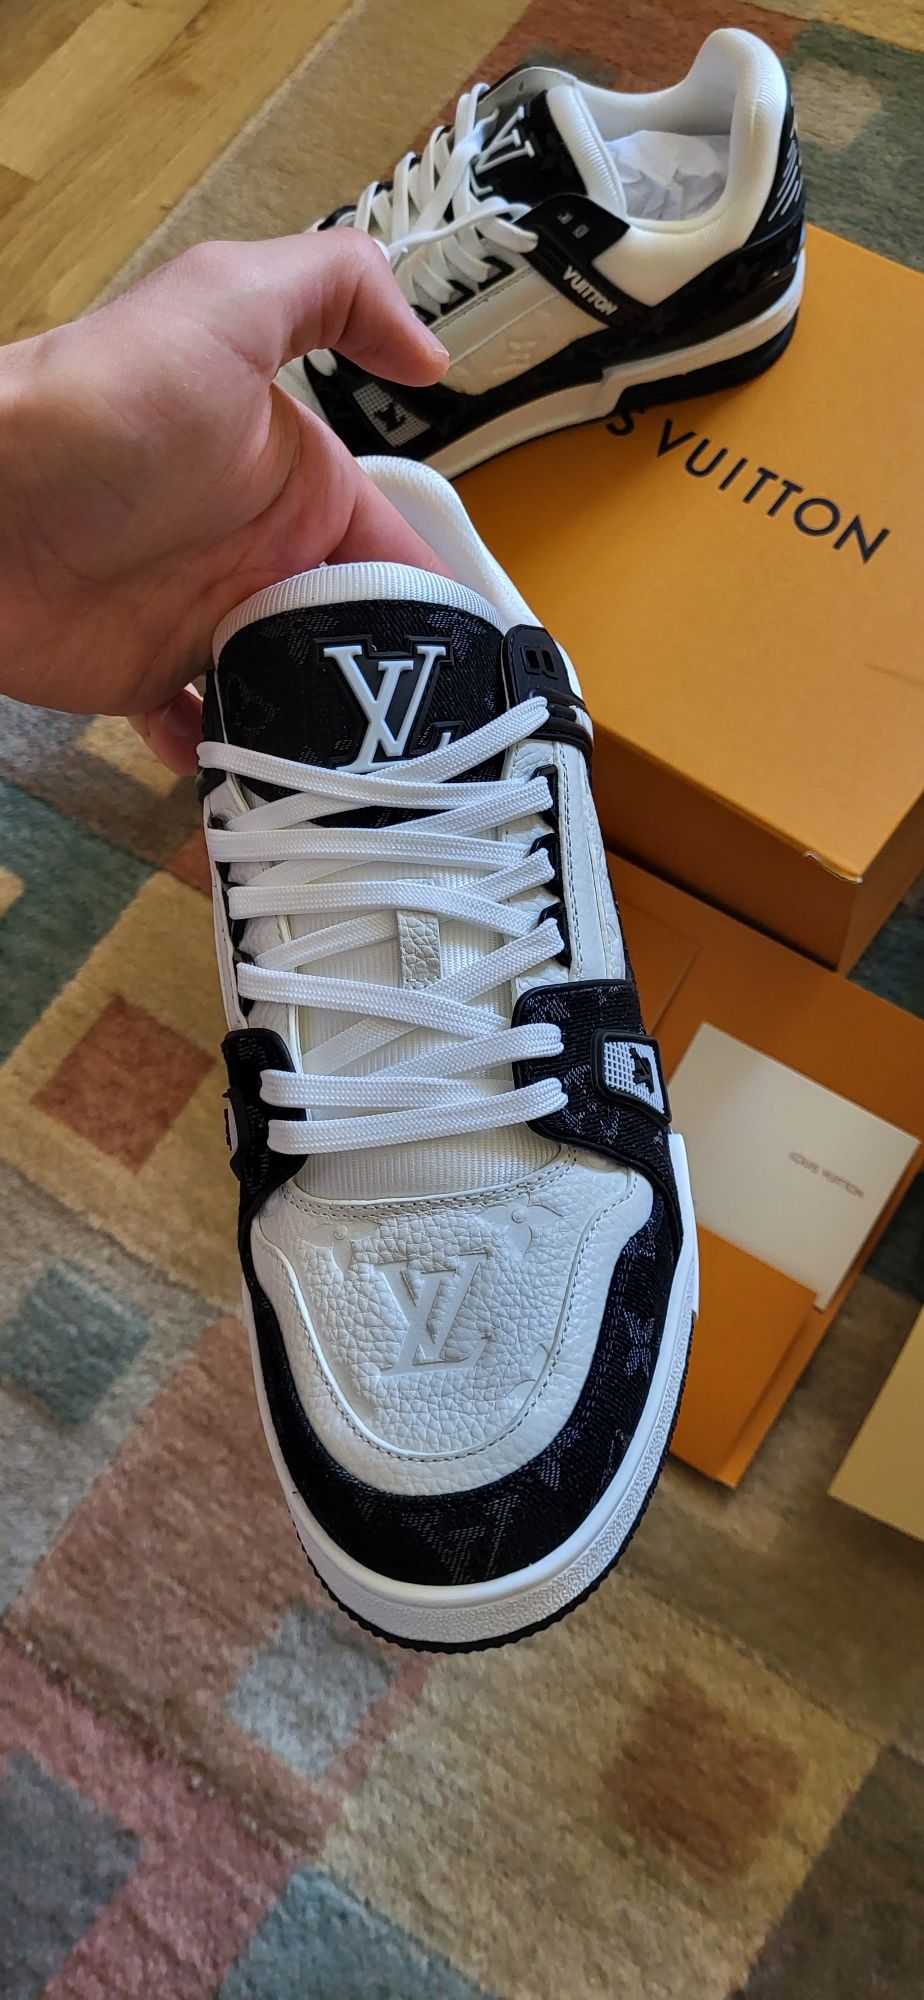 LV Trainers Black and White sneakers